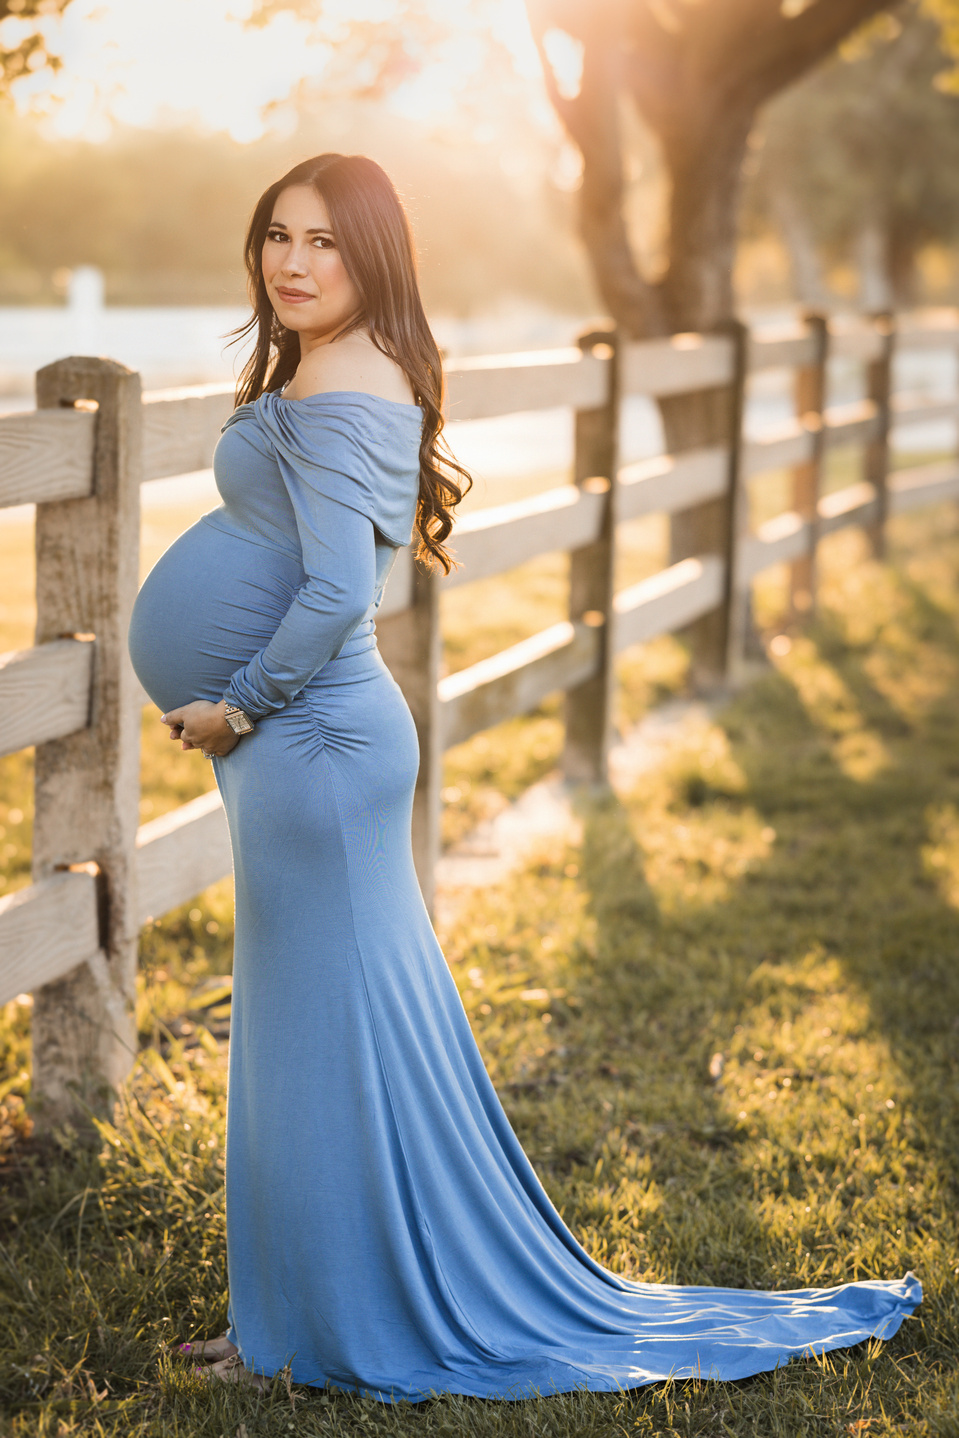 Outdoor maternity session at golden hour. The sun is glowing from behind the pregnant woman. She is standing on a grassy area in front of a big tree and a wooden fence